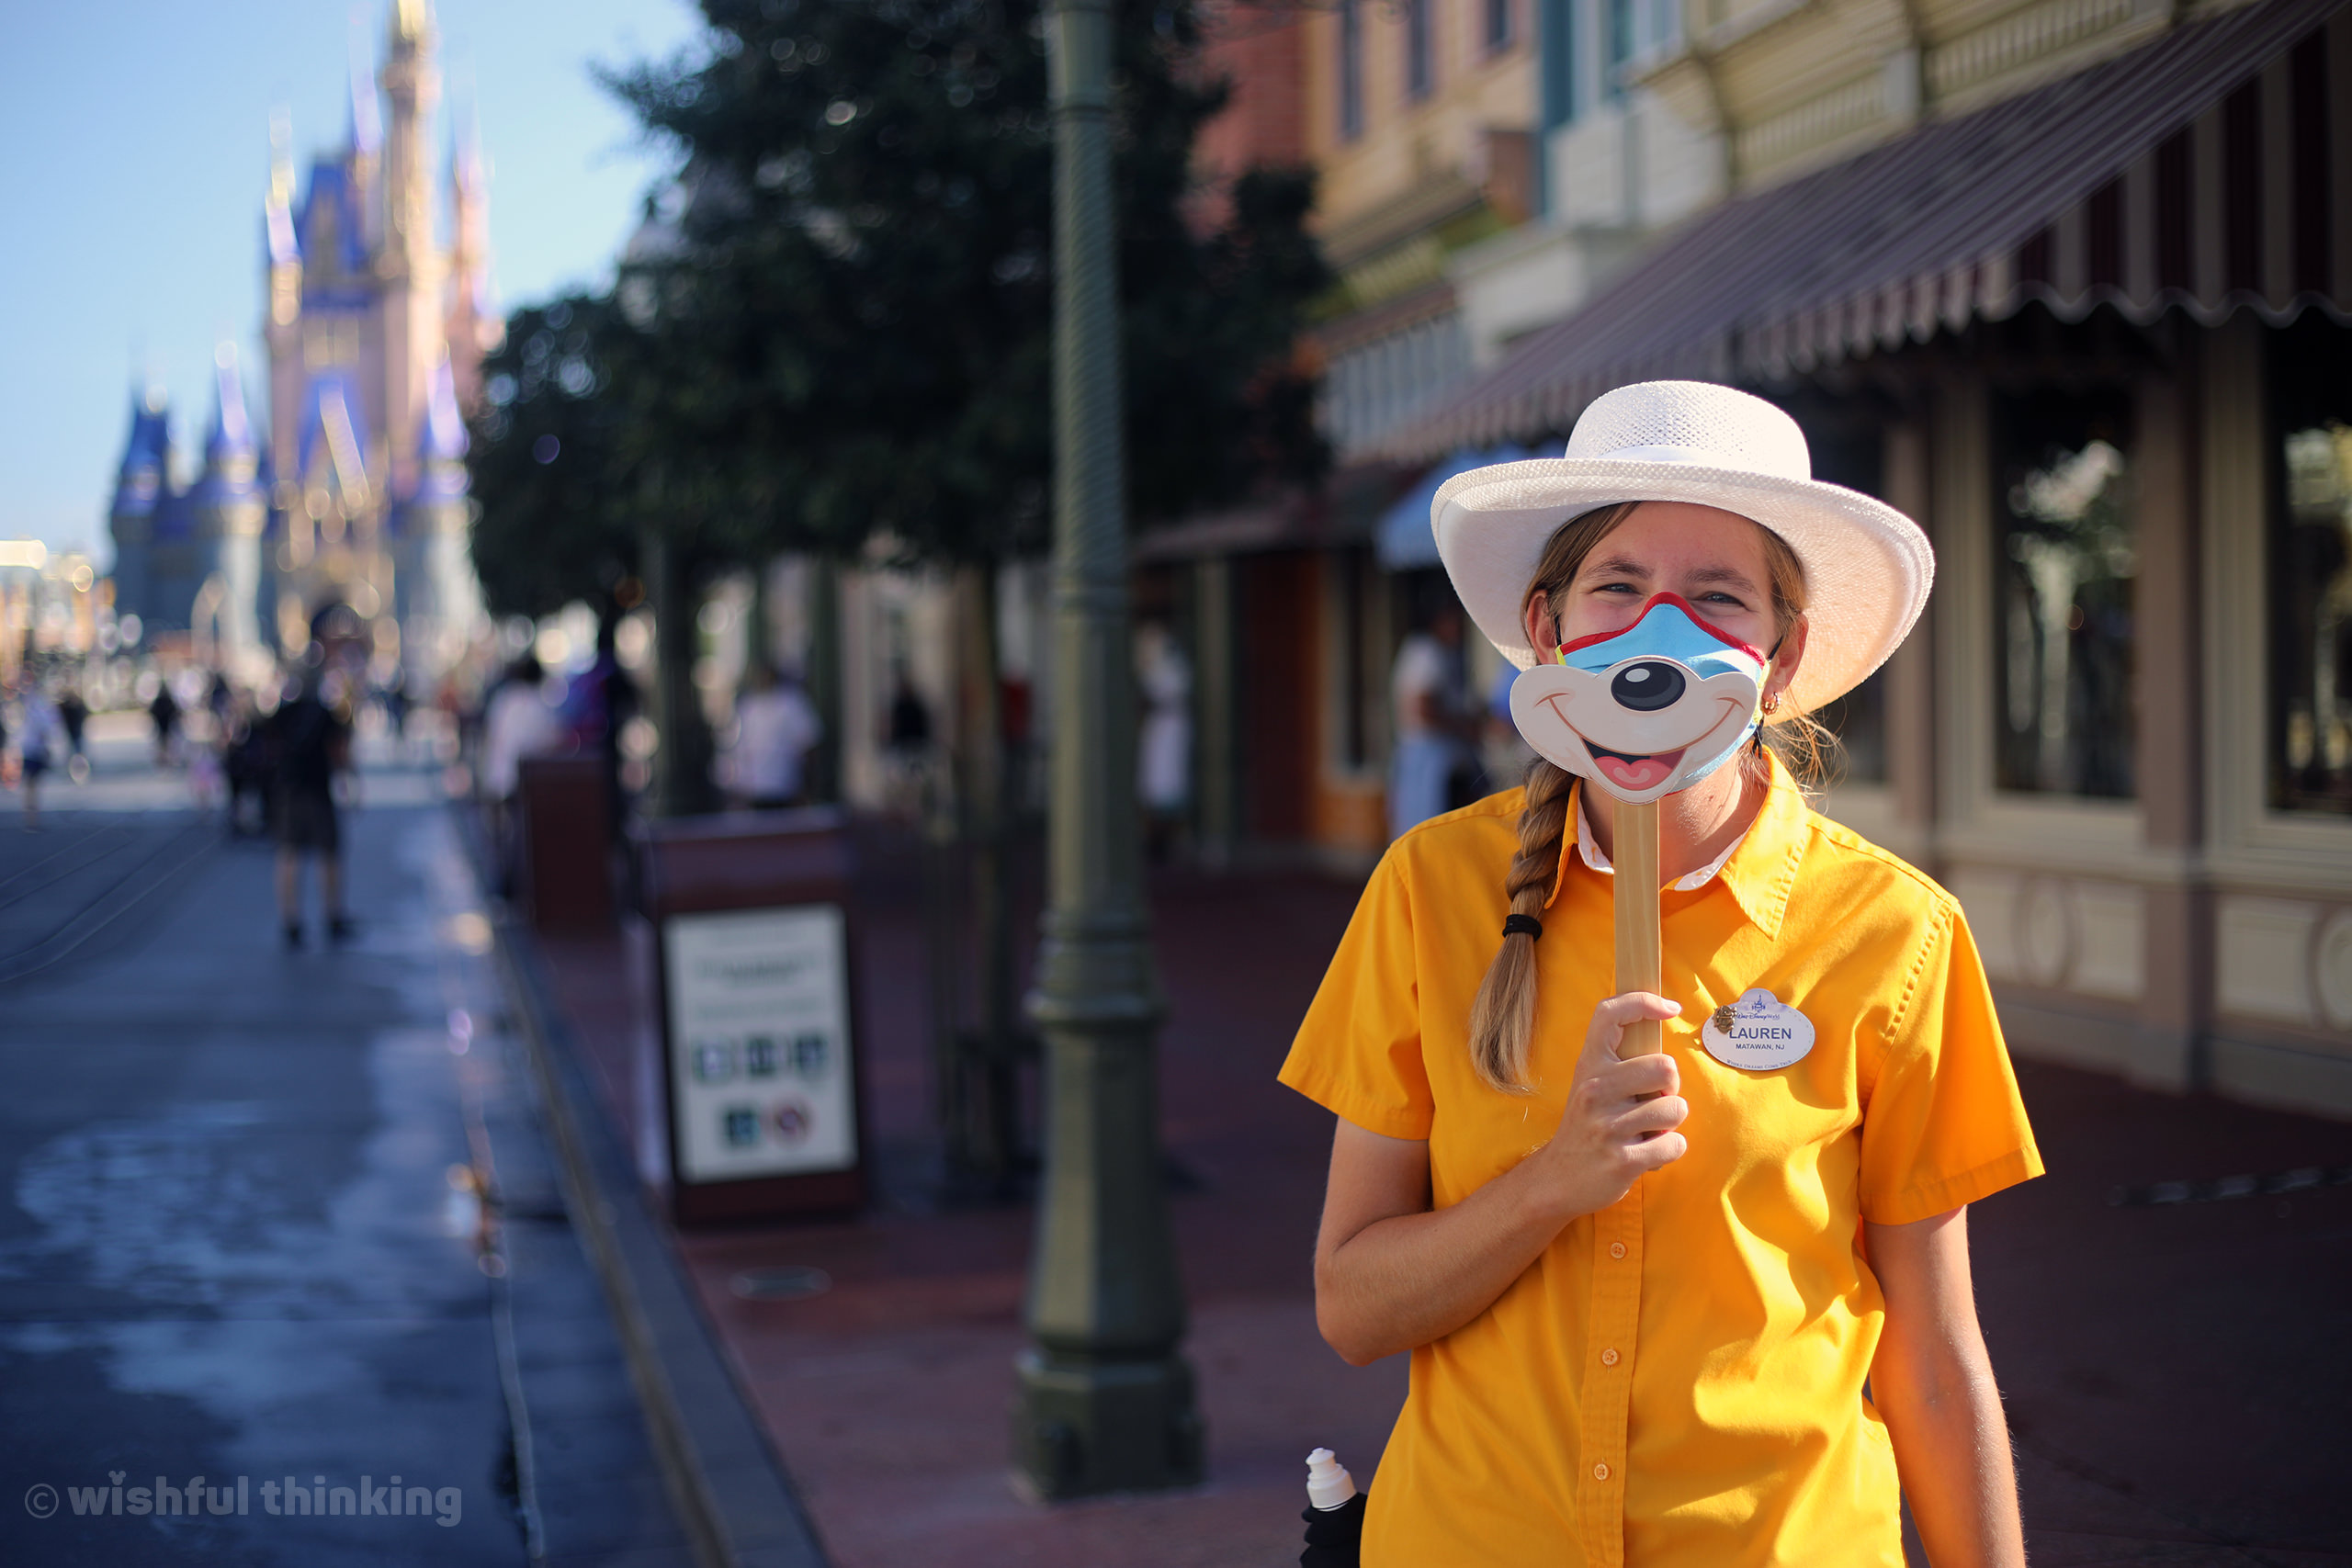 A smiling Walt Disney World Cast Member demonstrates how to wear a facial covering for COVID-19 Protections